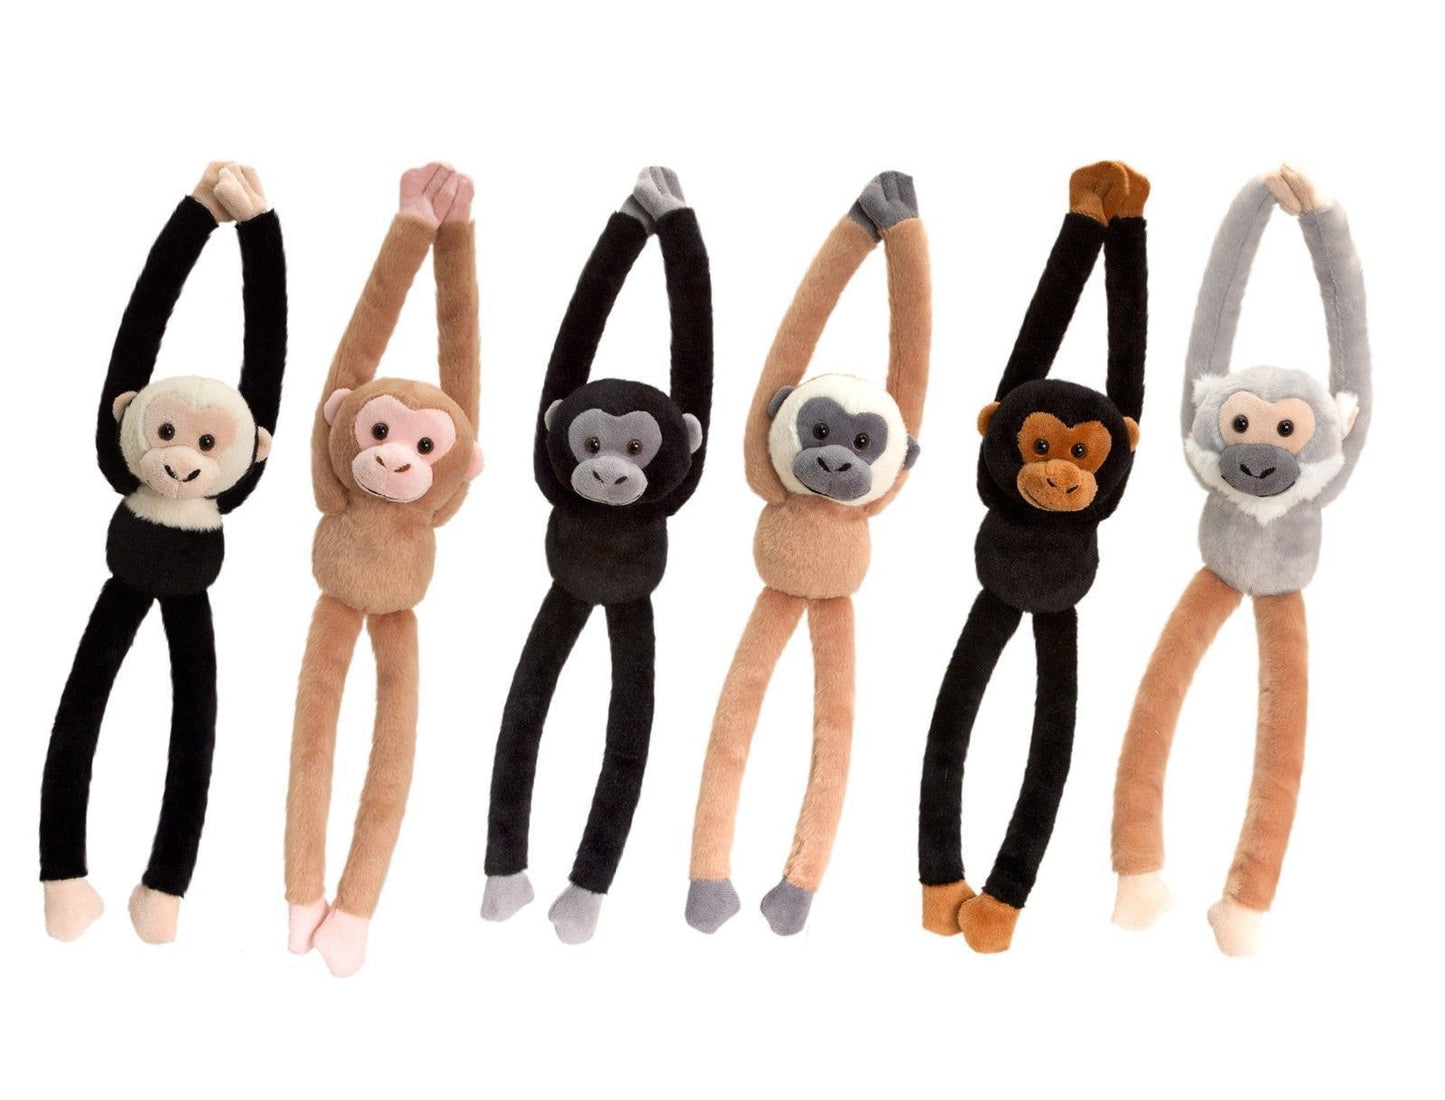 Keel Toys chattering   Hanging Monkey With Sound 46cm 6 Designs one supplied - hanrattycraftsgifts.co.uk